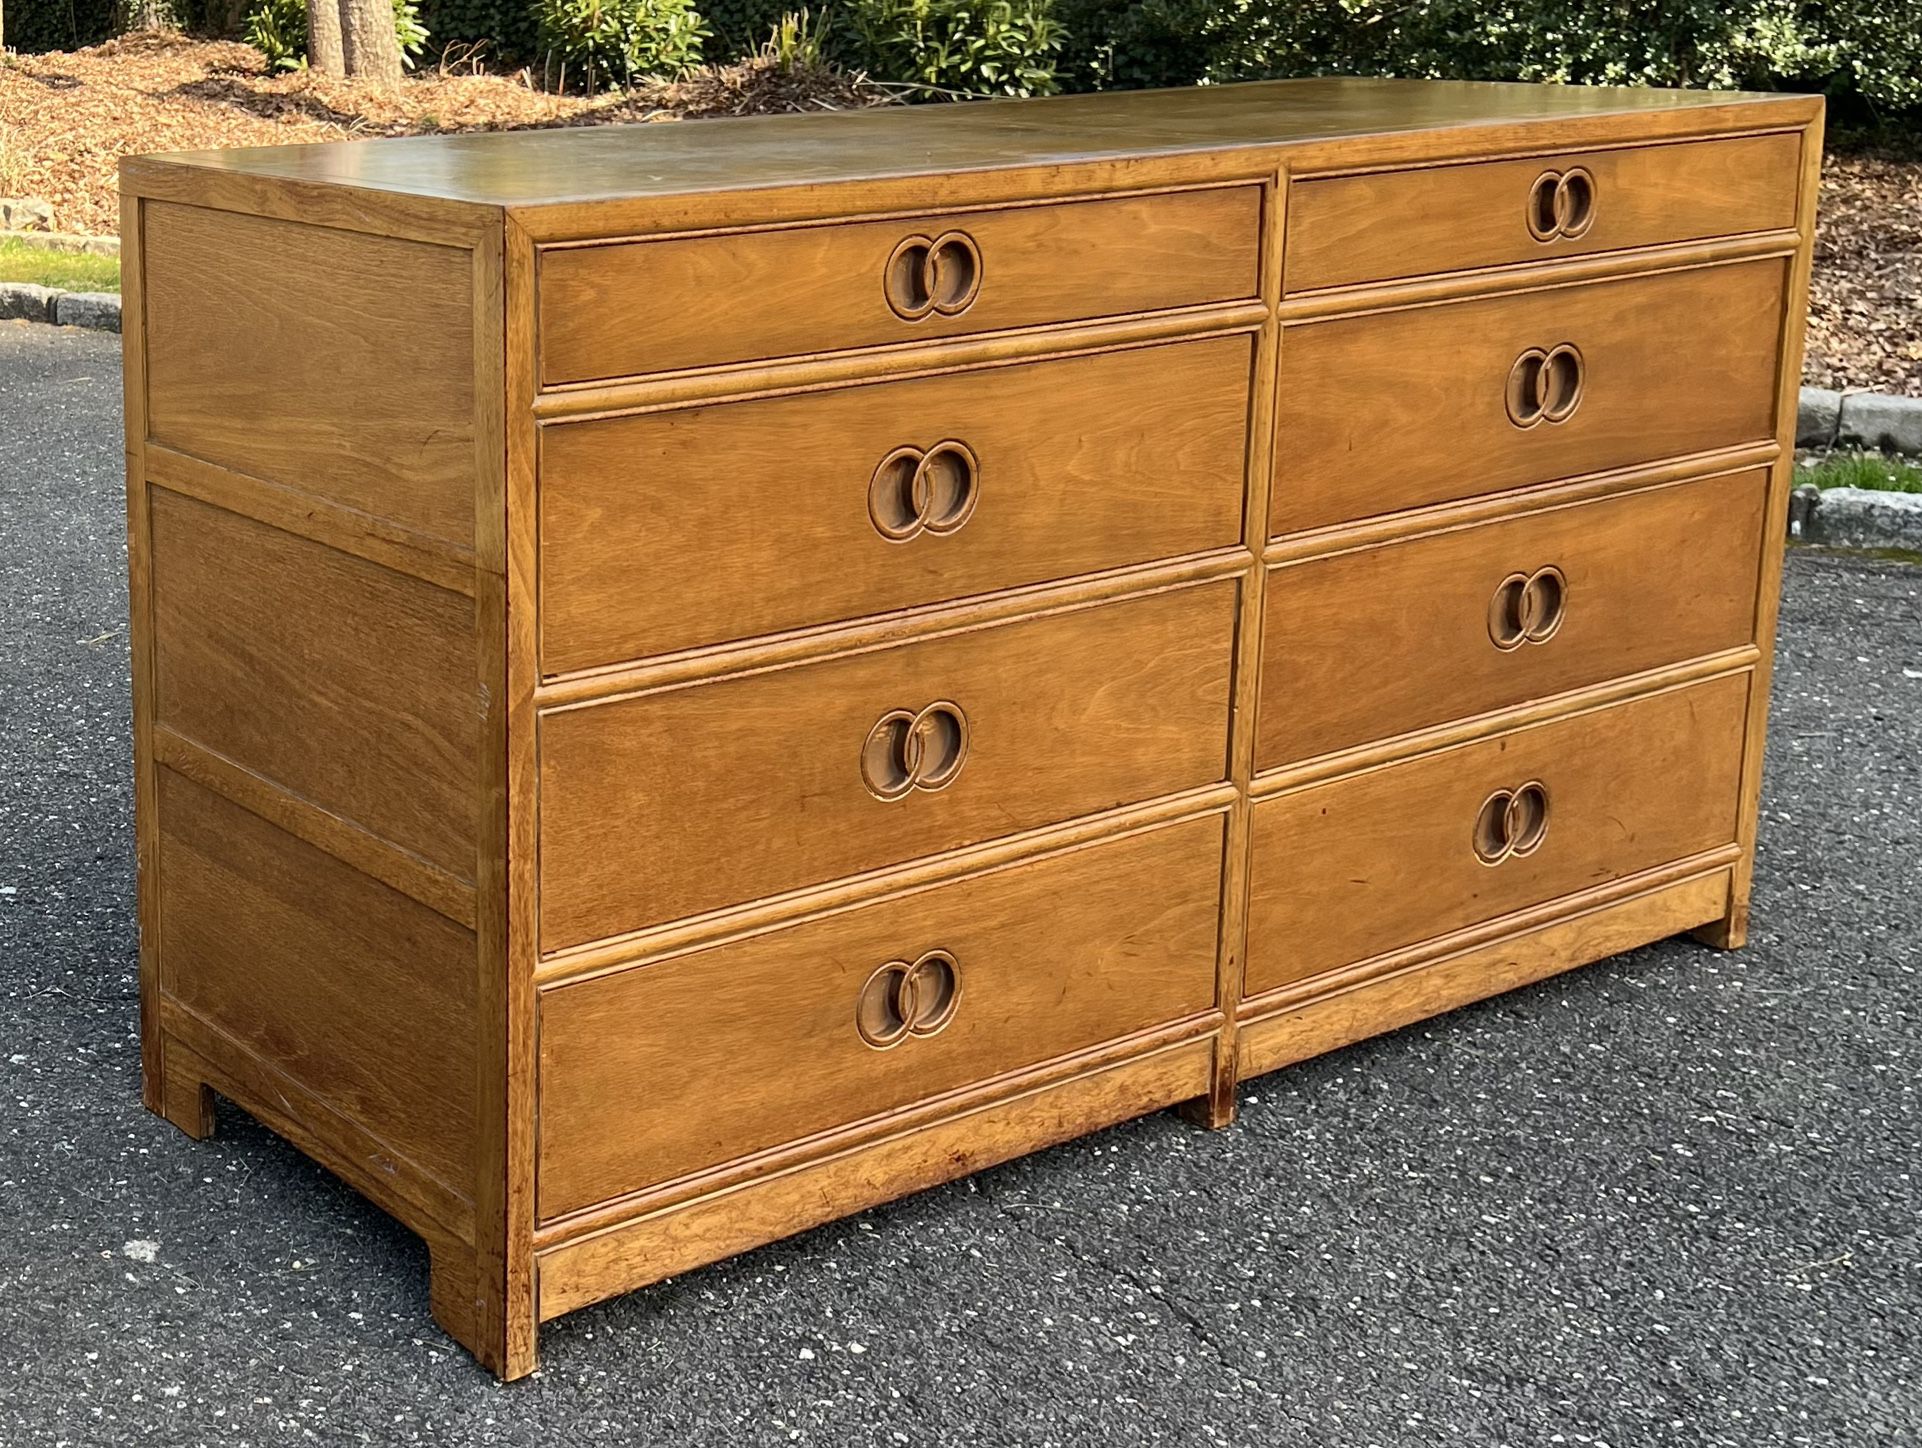 Midcentury Long Dresser by Michael Taylor (for Baker Furniture Co.)